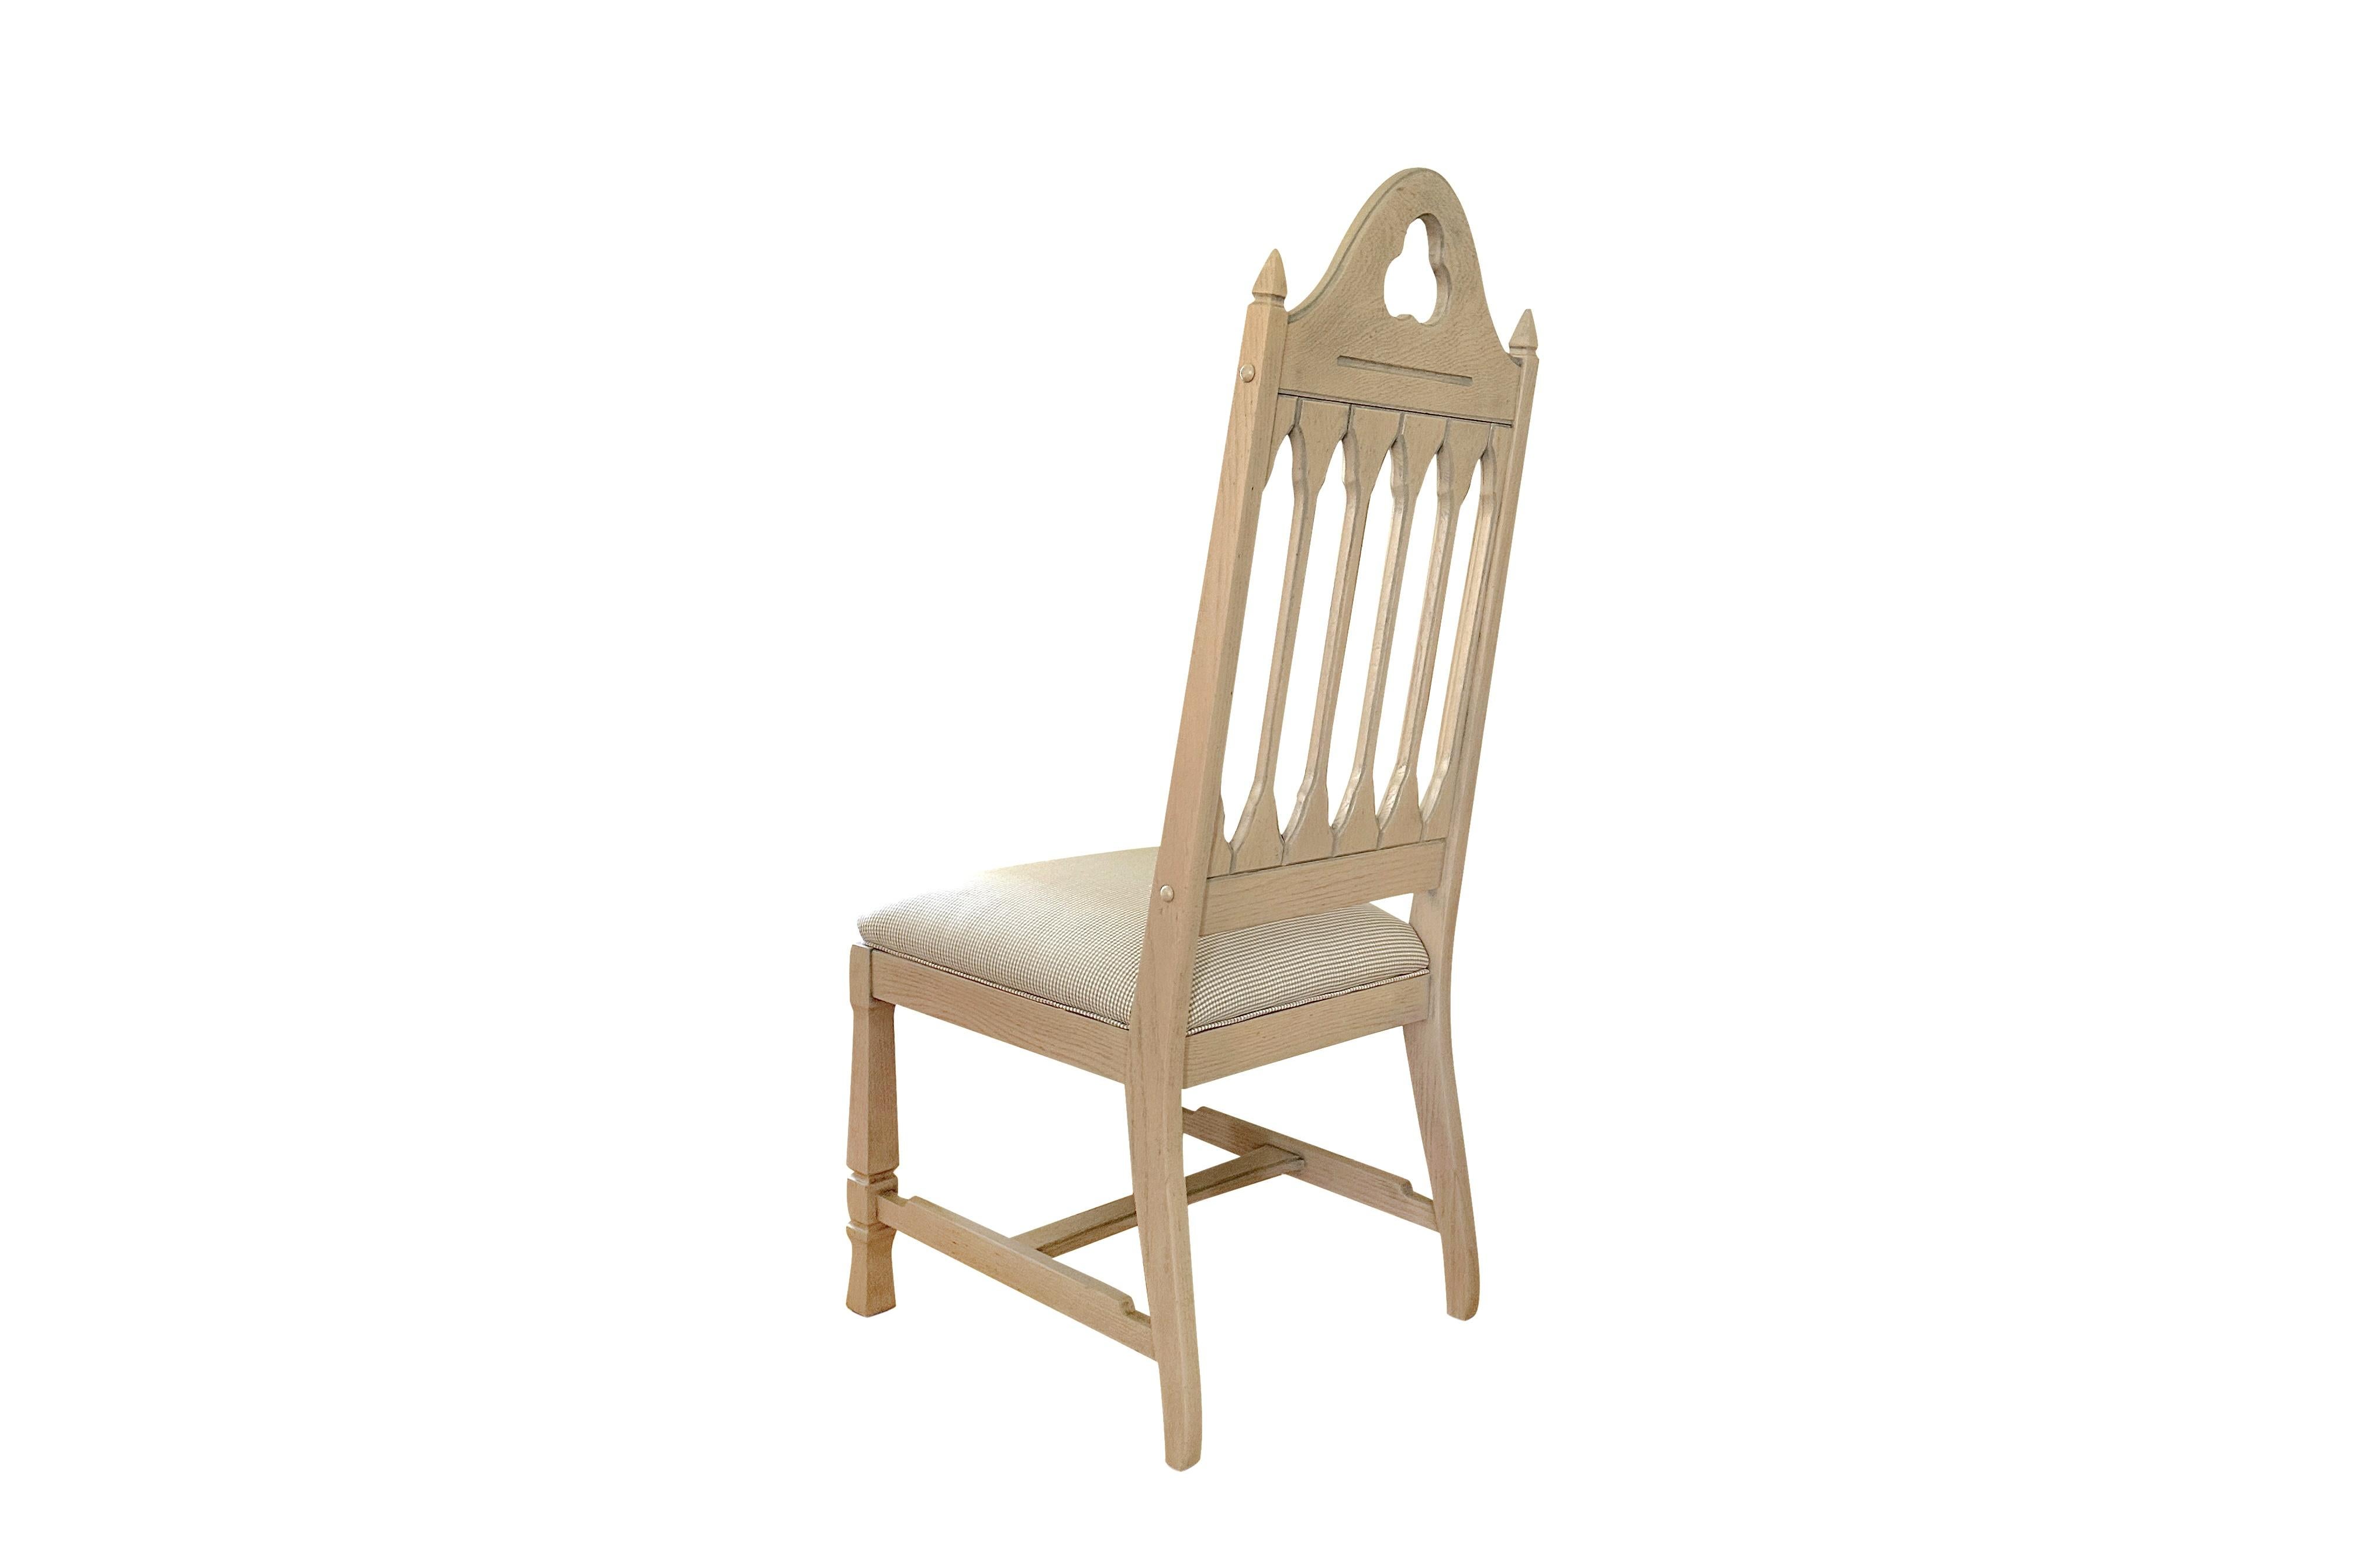 Gothic Revival Antique Bleached Gothic Dining Chairs with Mini Check Seat (Set of 6) For Sale